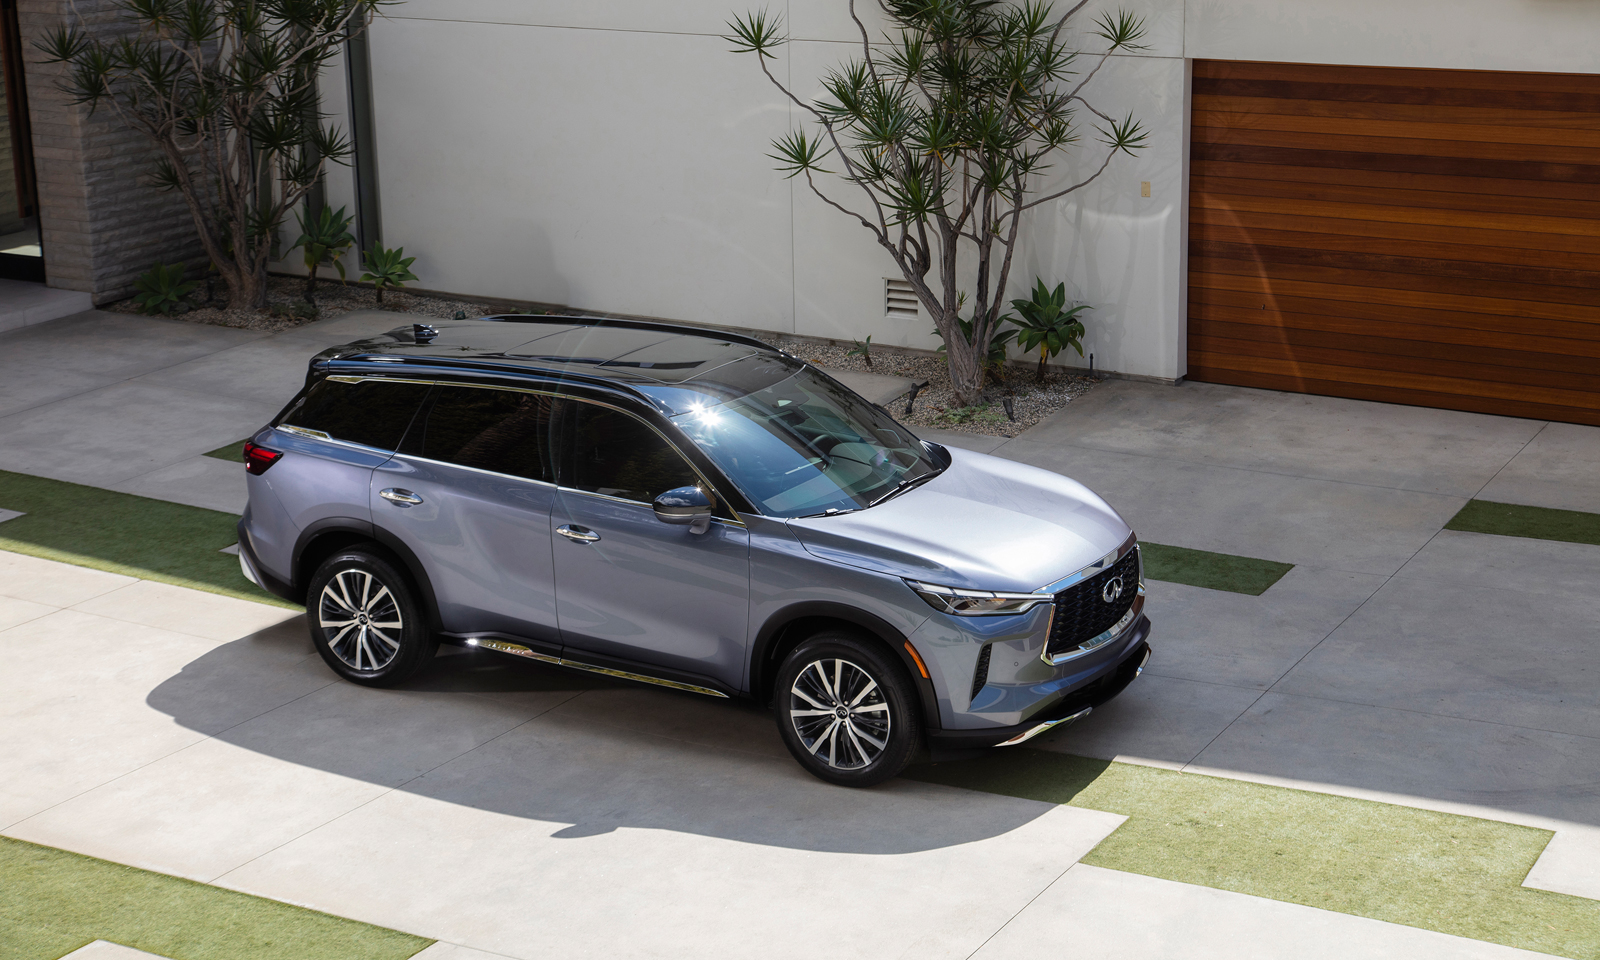 The 2022 Infiniti QX60 SUV with options